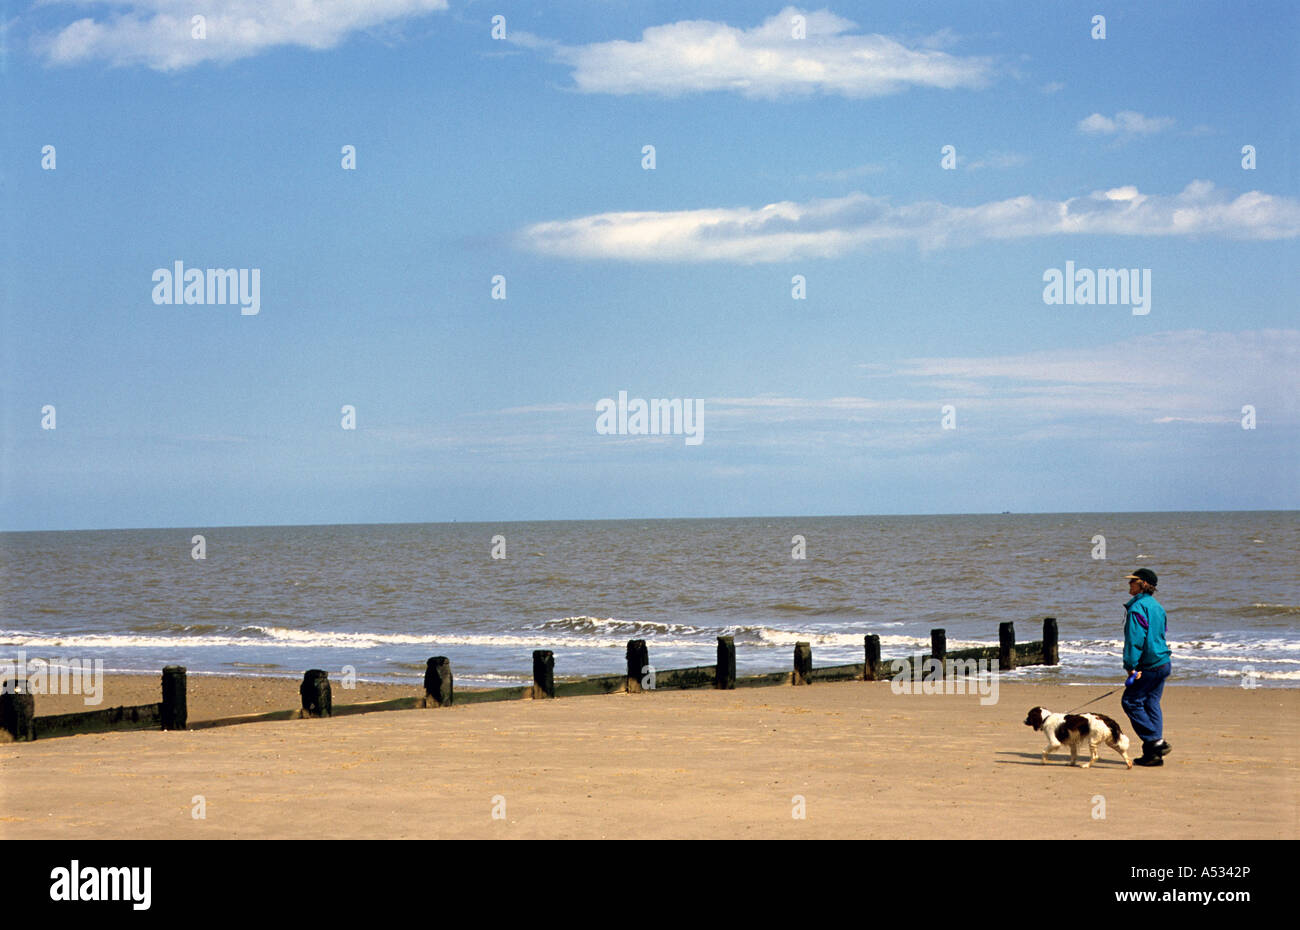 Woman walking her dog on the beach at Frinton-on-sea, Essex, UK. Stock Photo